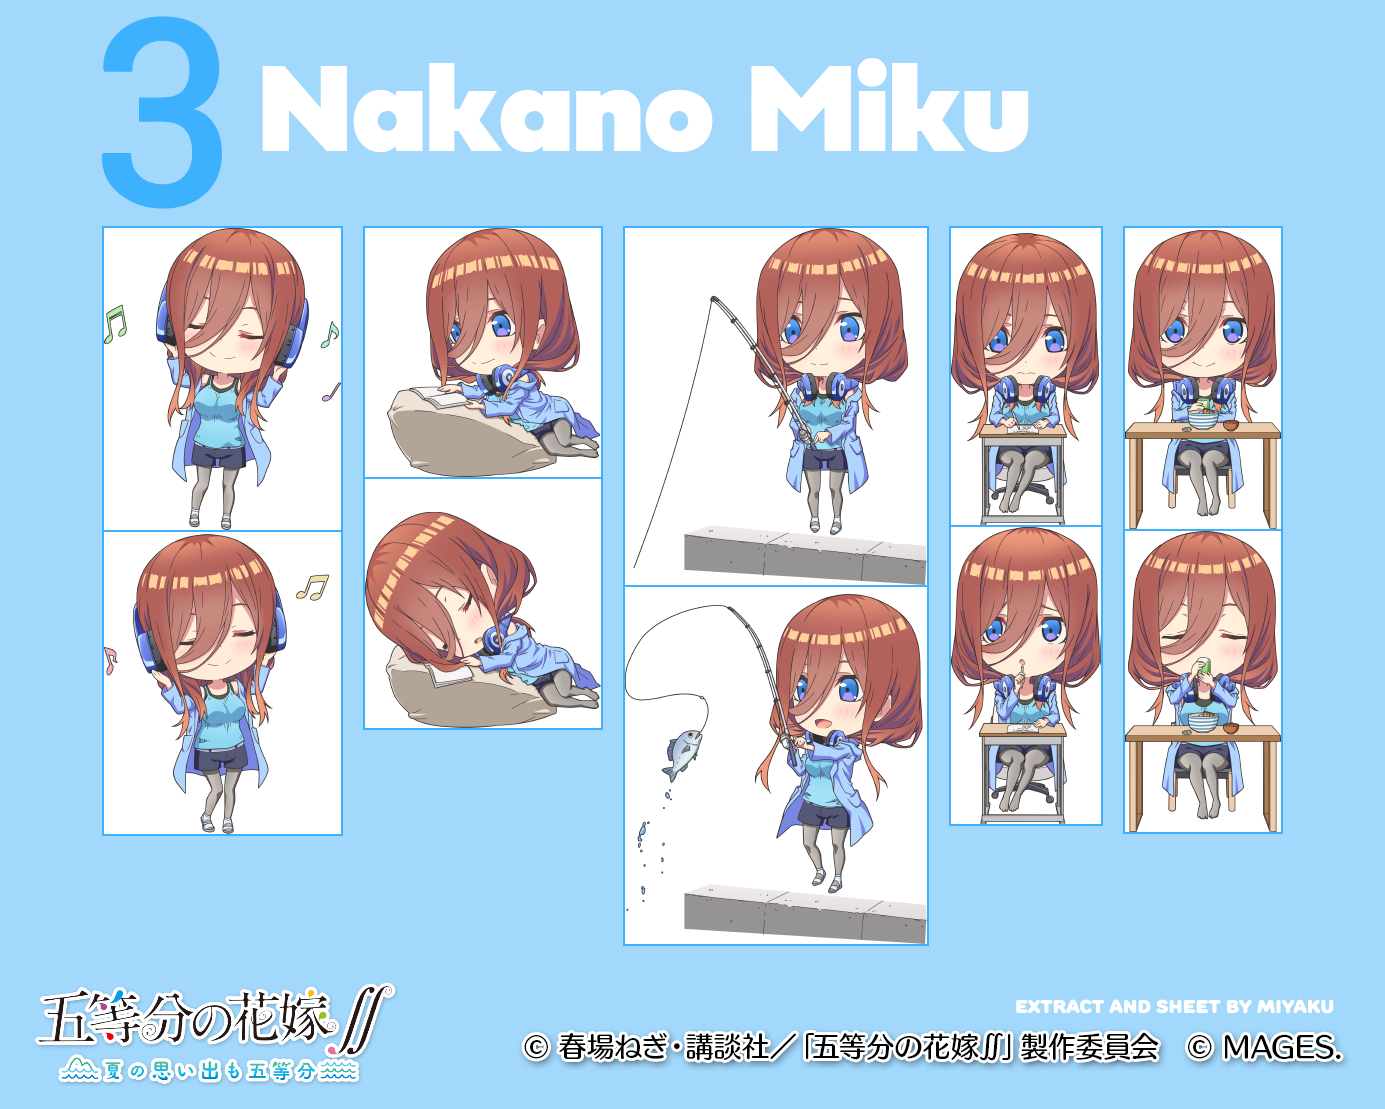 The Quintessential Quintuplets ∬: Summer Memories Also Come in Five - Miku Nakano (Chibi)